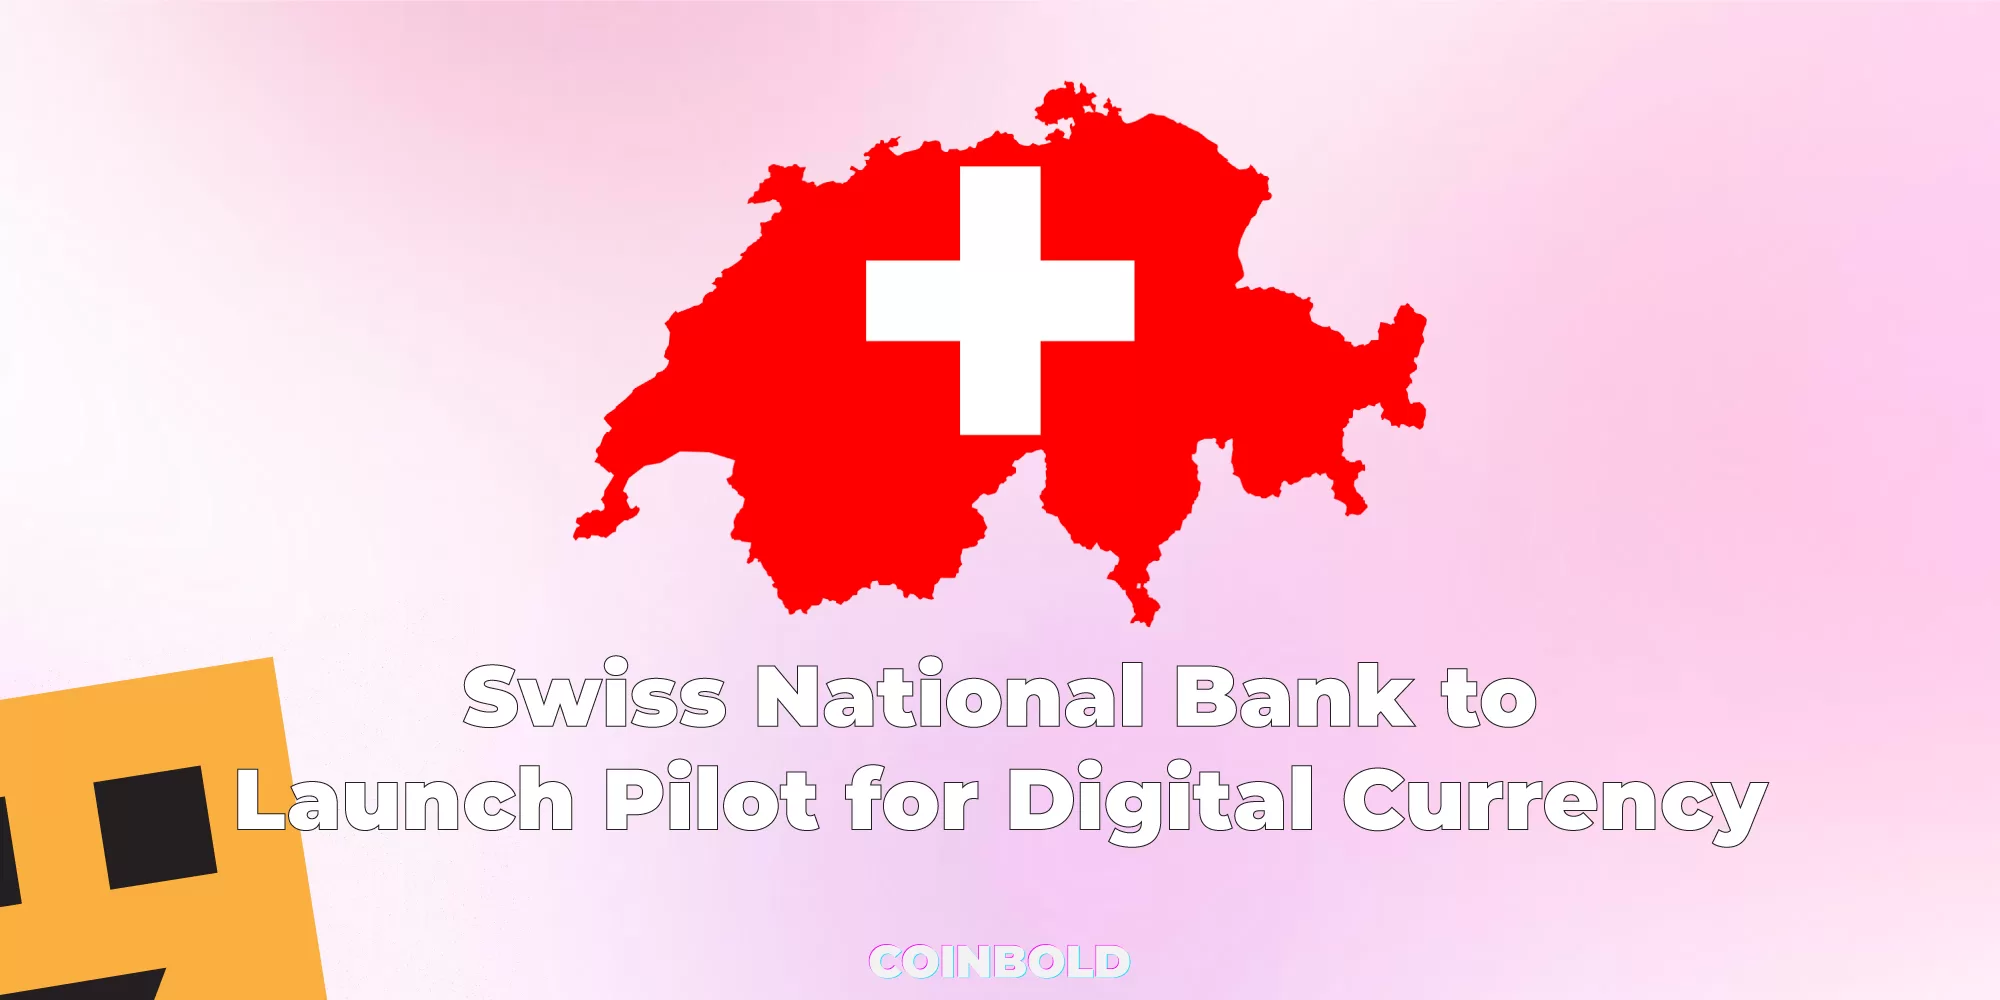 Swiss National Bank to Launch Pilot for Digital Currency